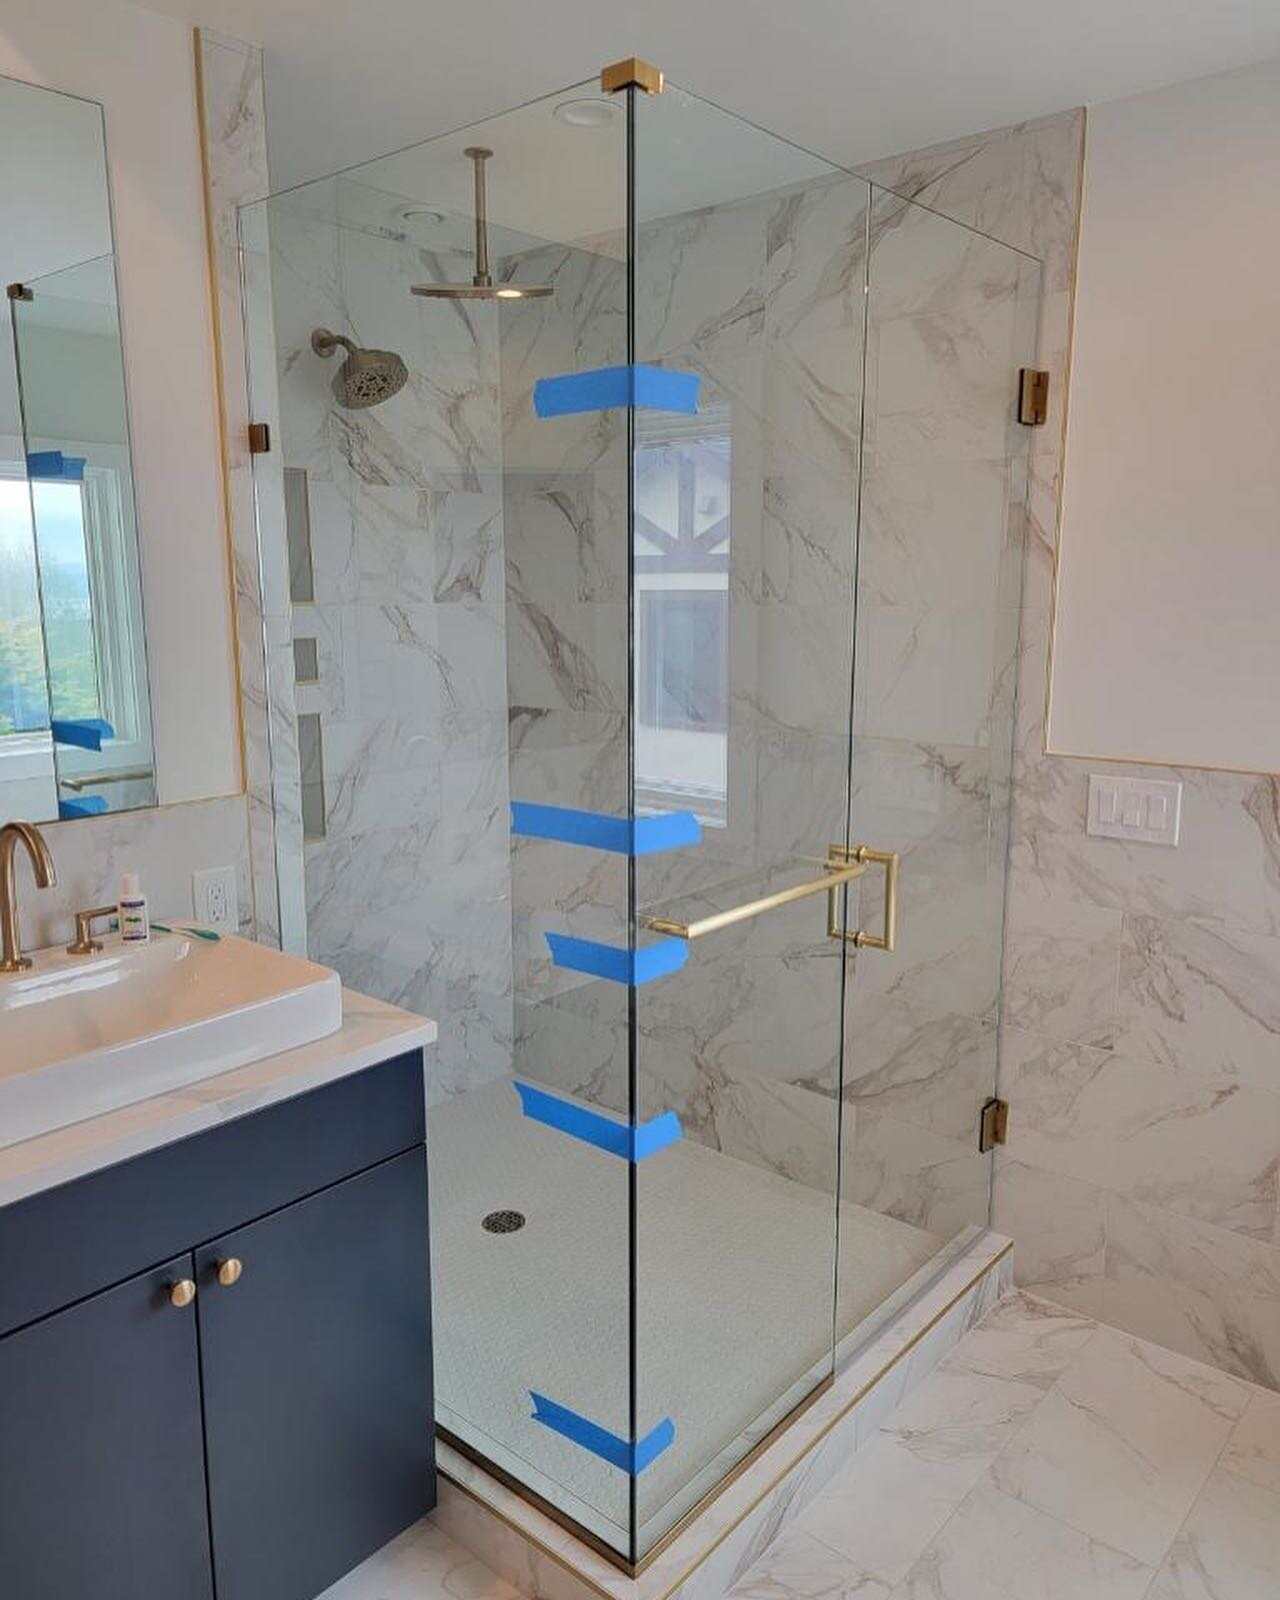 Satin Brass Hardware was a Beautiful finish for this frameless enclosure. Installed by our technicians, Marcus and Eddie. 

#seattleshowers #seattleshower#seattleshowerdoors #framelessglassenclosure #framelessglassenclosures #showerenclosure #glasssh